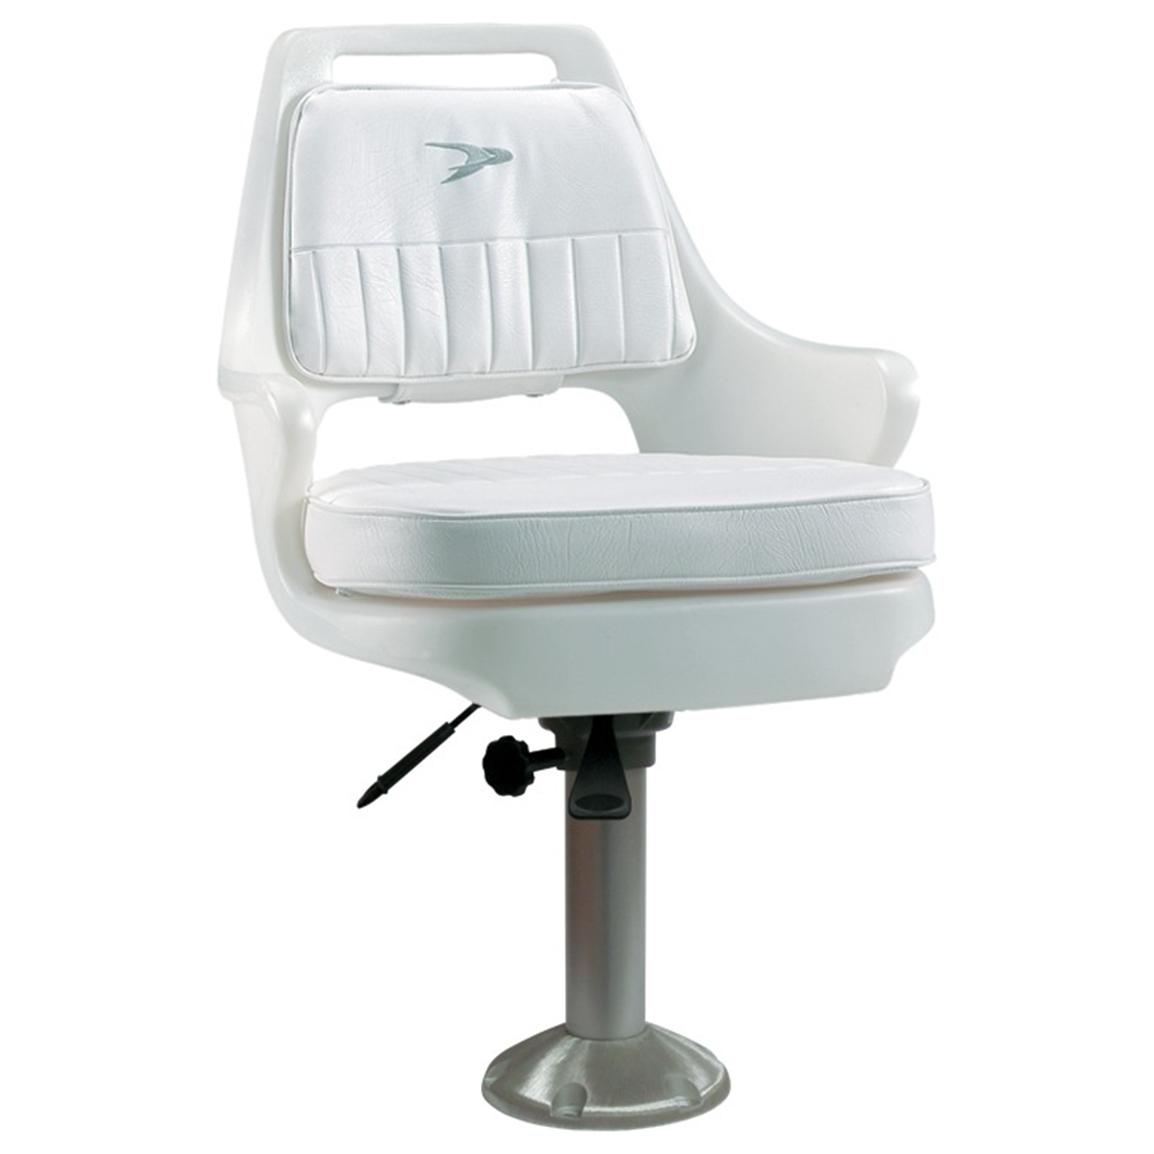 Wise® Offshore Pilot Chair with 15" Fixed Pedestal / Mounting Plate / Seat Slider / Seat Swivel